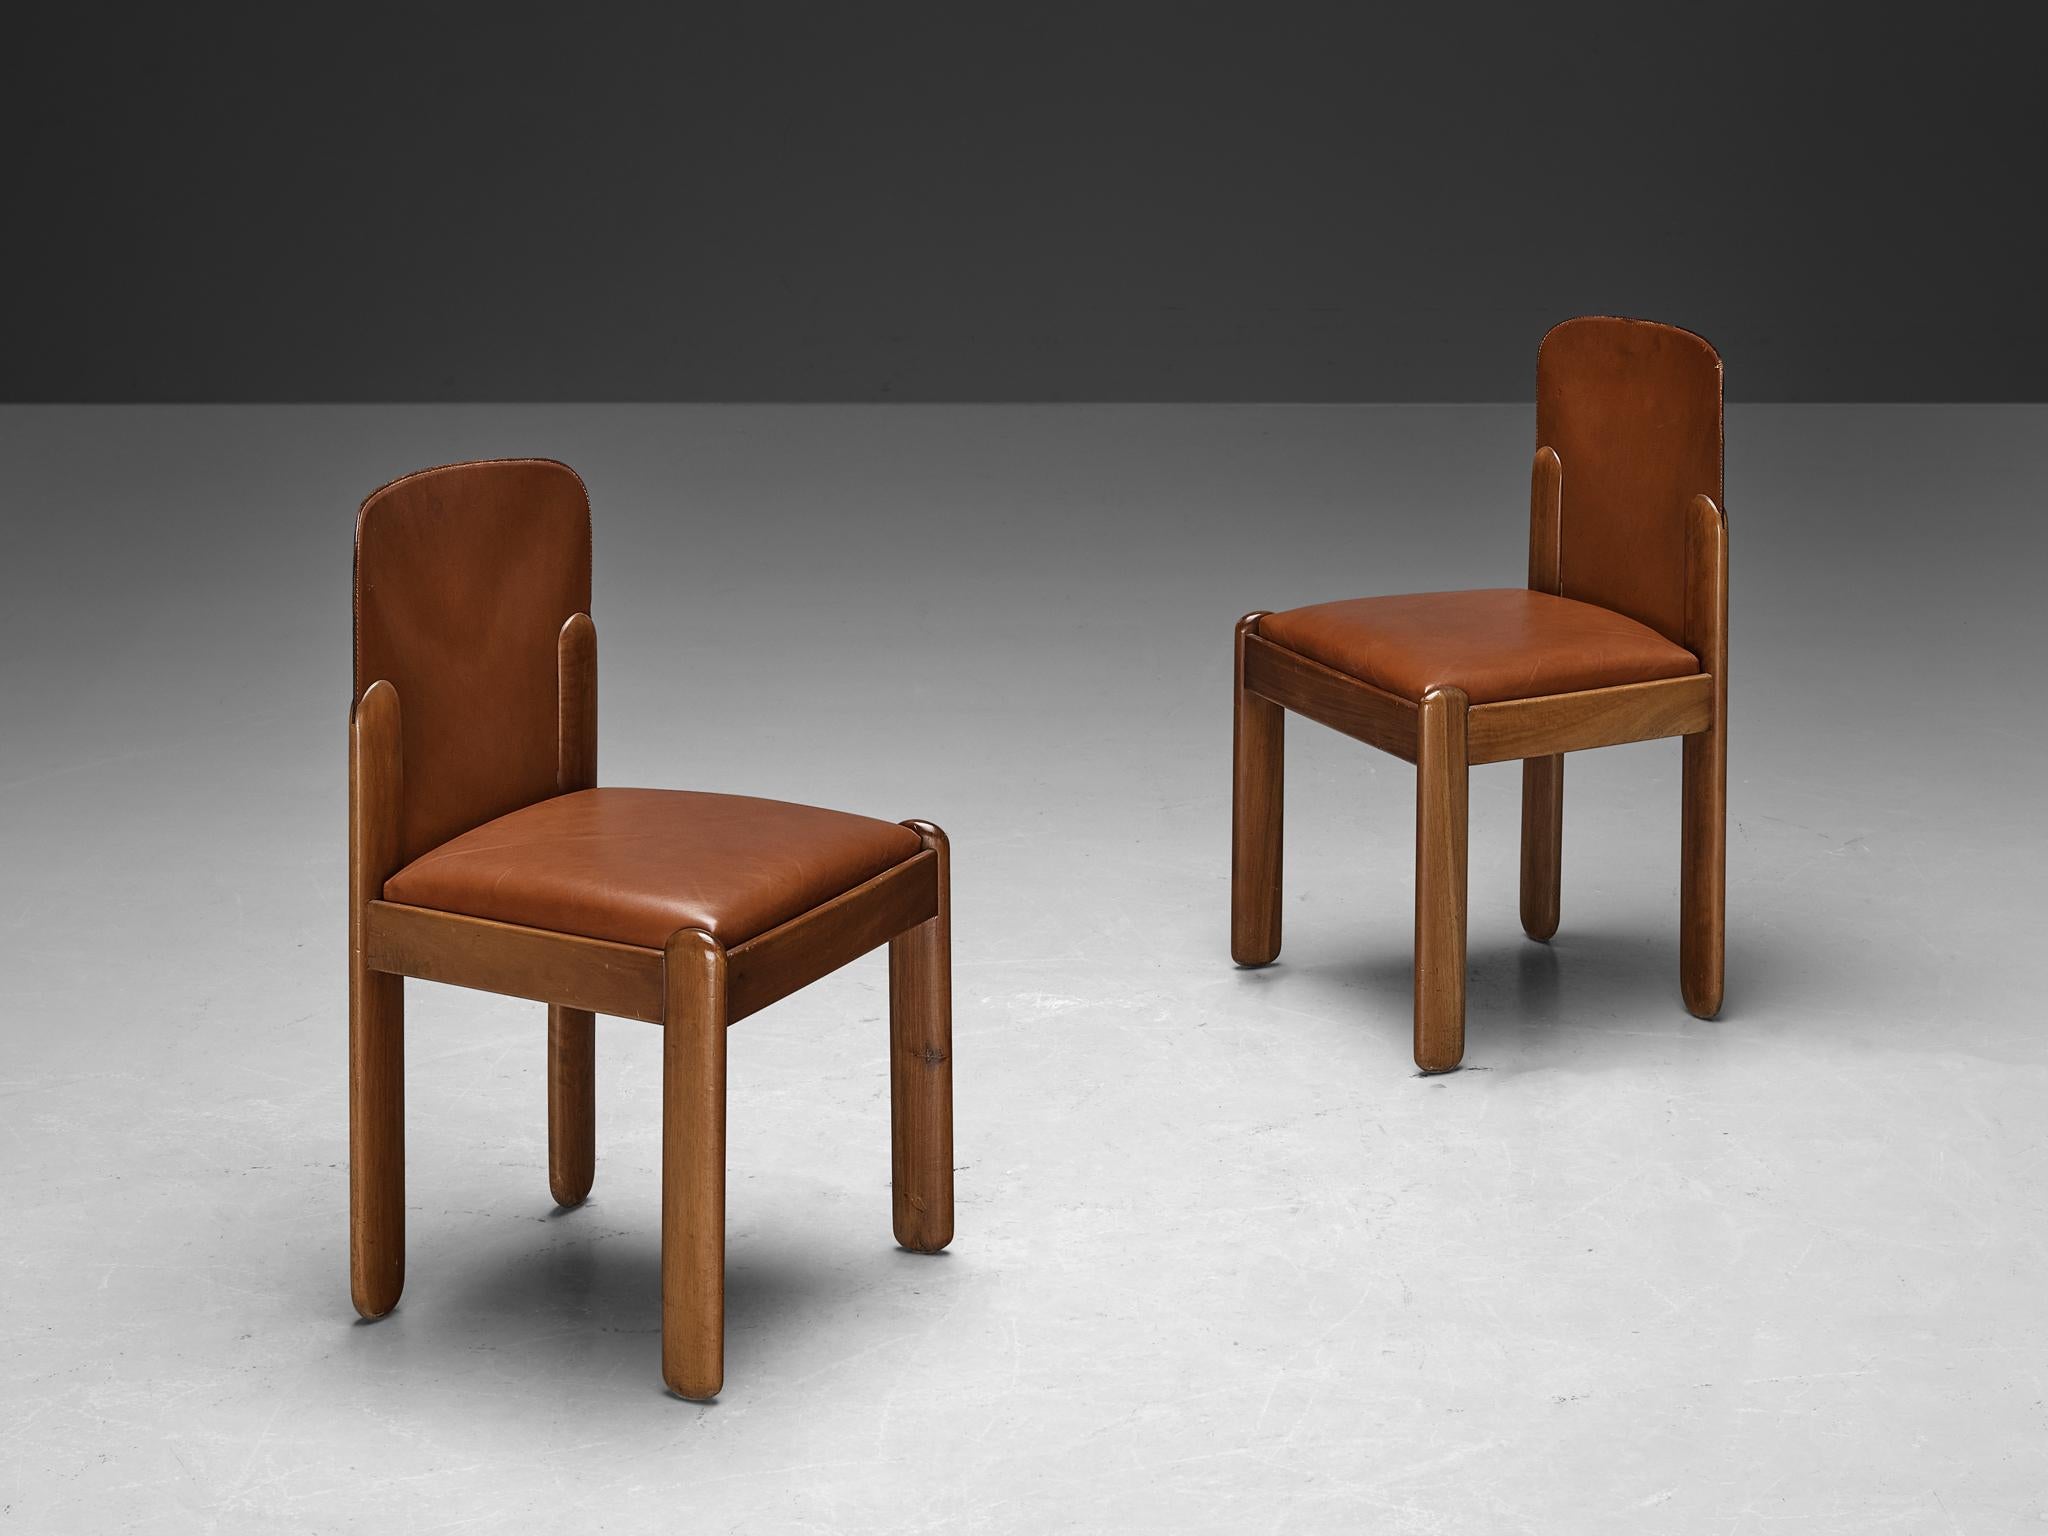 Silvio Coppola for Bernini, pair of dining chairs, model '330', cognac brown leather, walnut, Italy, 1969

Wonderful duo of dining chairs in cognac leather and walnut wood by Italian designer Silvio Coppola. These aesthetically well balanced chairs